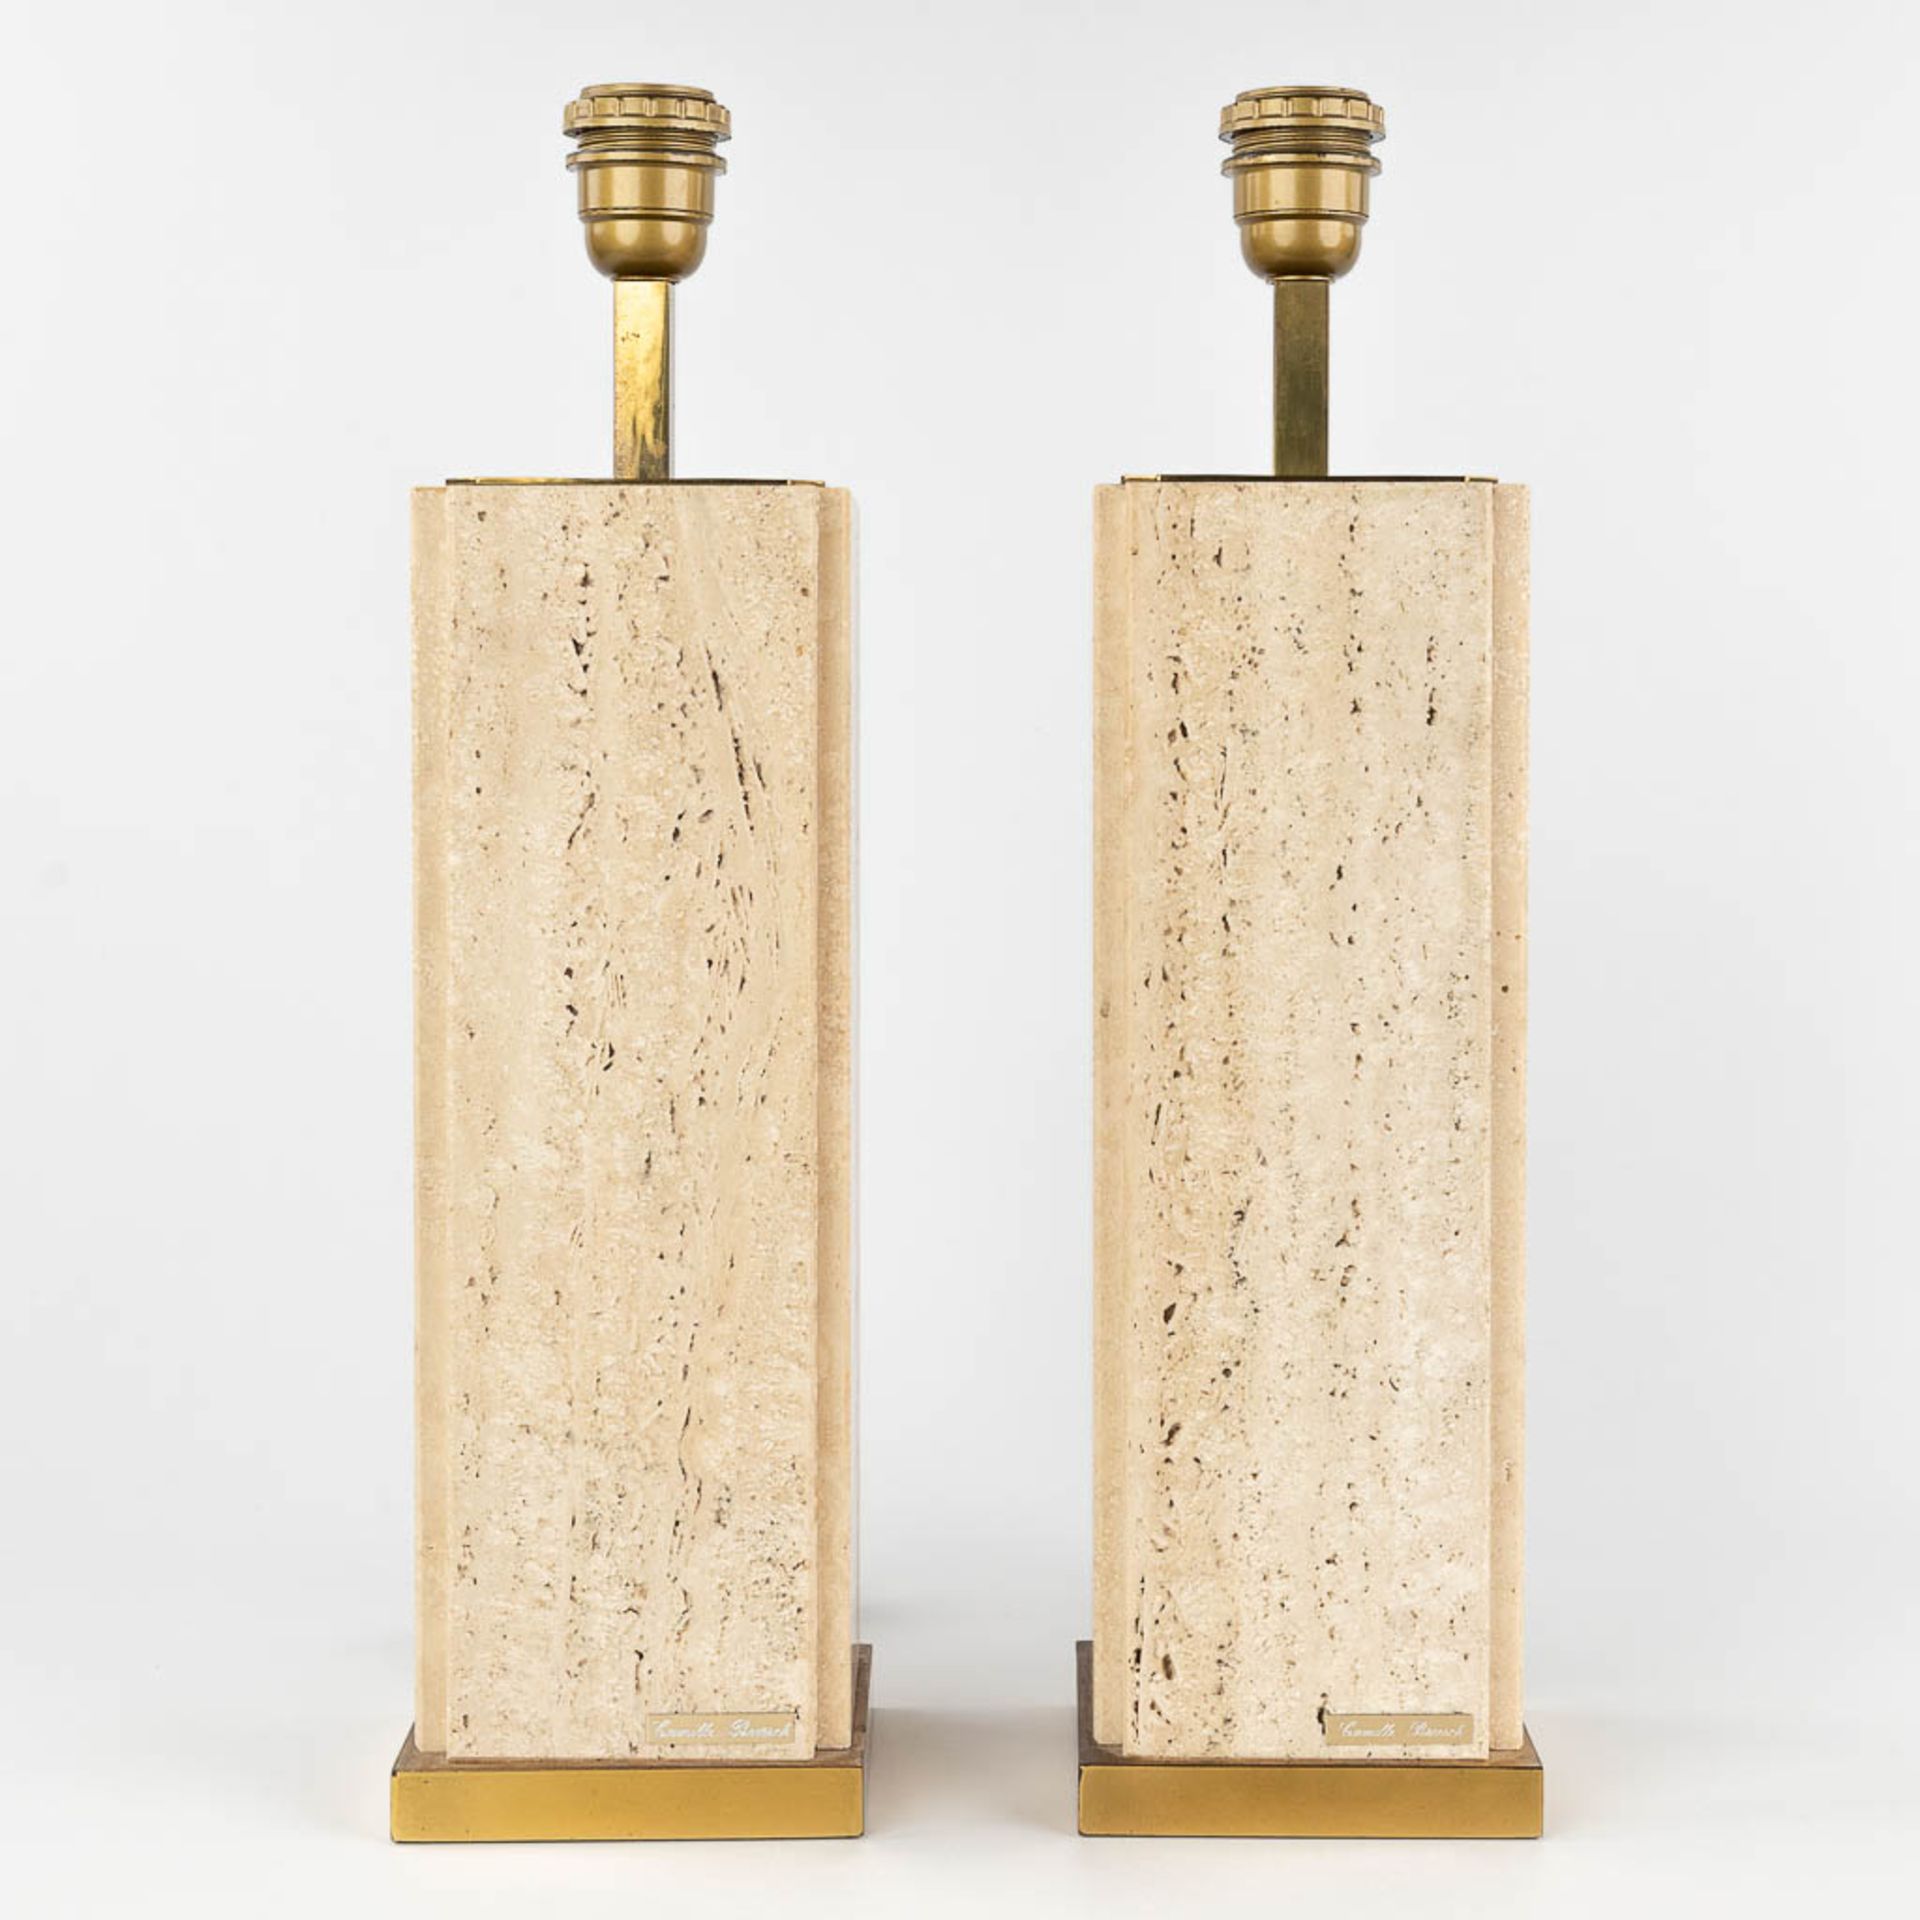 Camille BREESCHE (XX) 'Pair of table lamps' Brass and Travertine. (L: 13 x W: 13 x H: 49 cm)